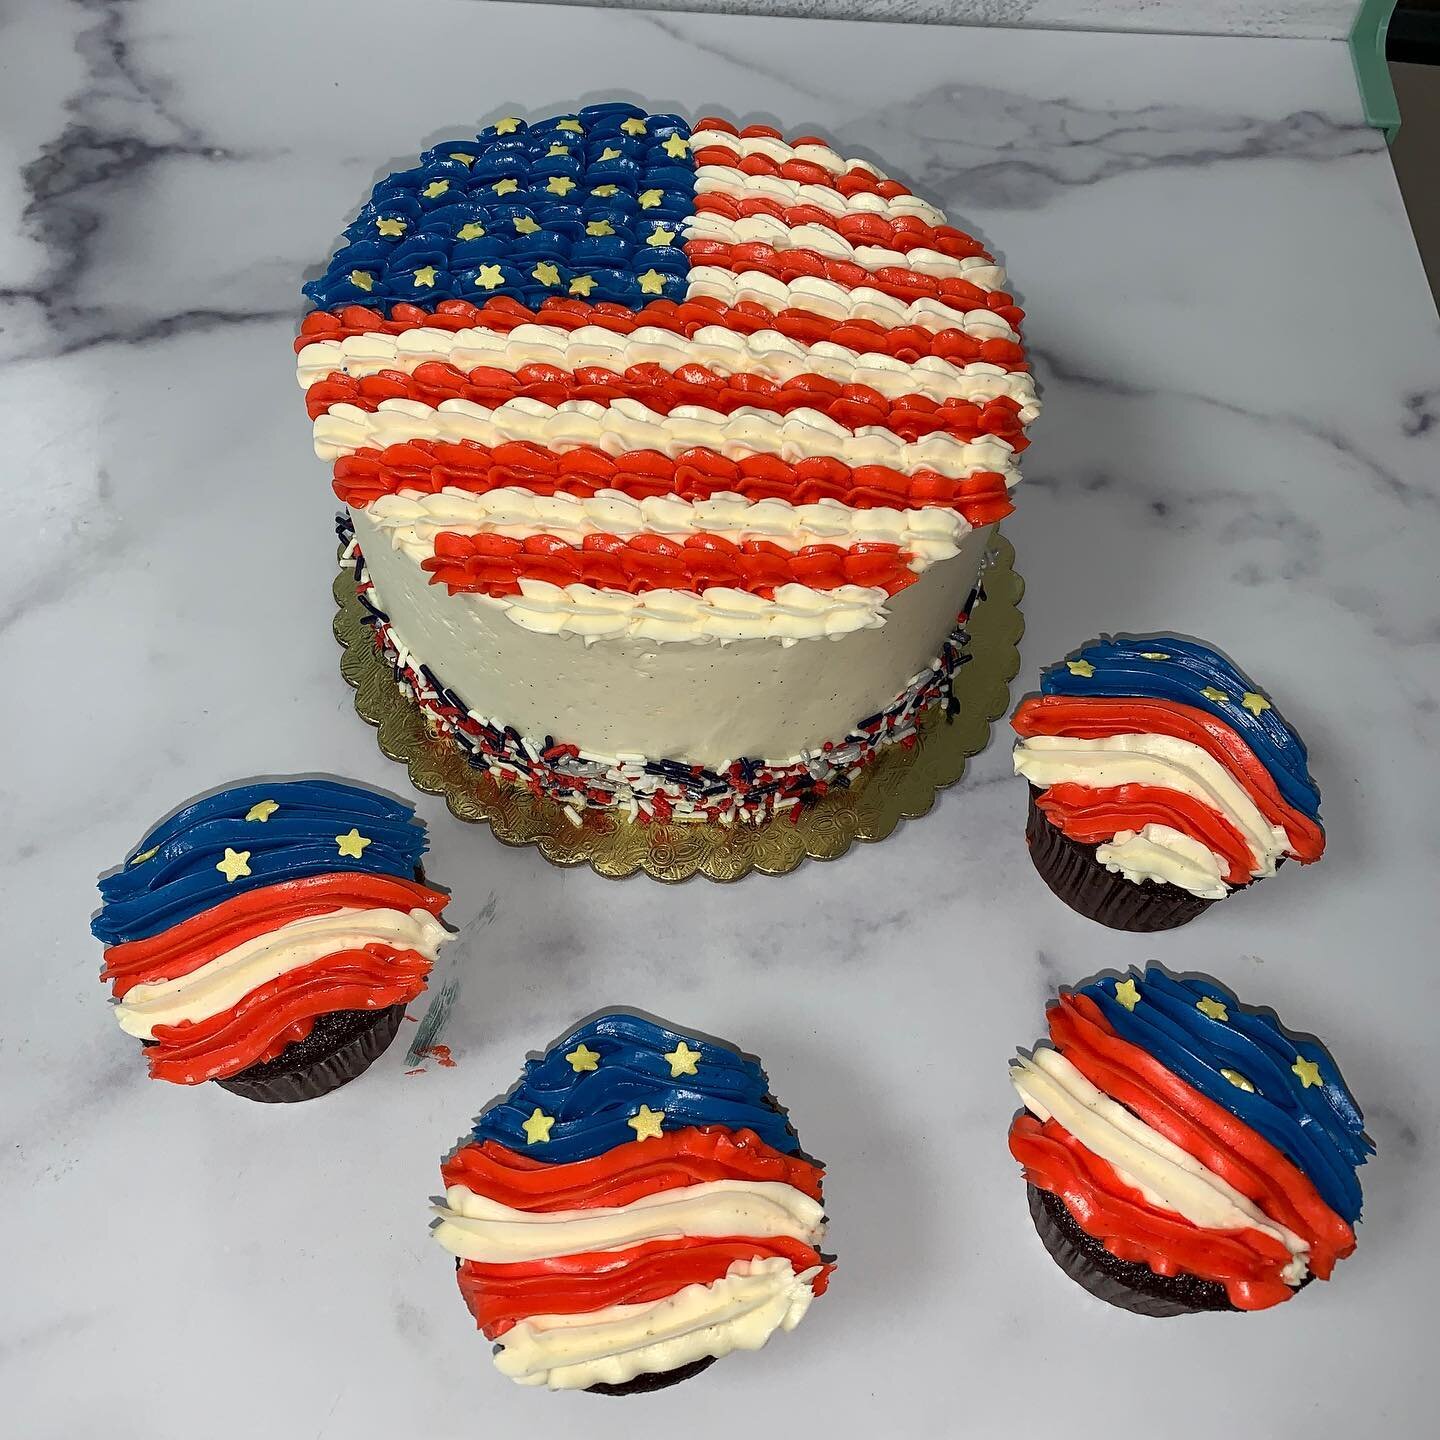 Happy 4th everyone! Treat yourself to breakfast and grab some goodies for your holiday celebration today! We are open 7-1! Starting tomorrow we are open on Mondays through Labor Day.  #cake #holiday #dessert #sweets #ostervillevillage #capecod